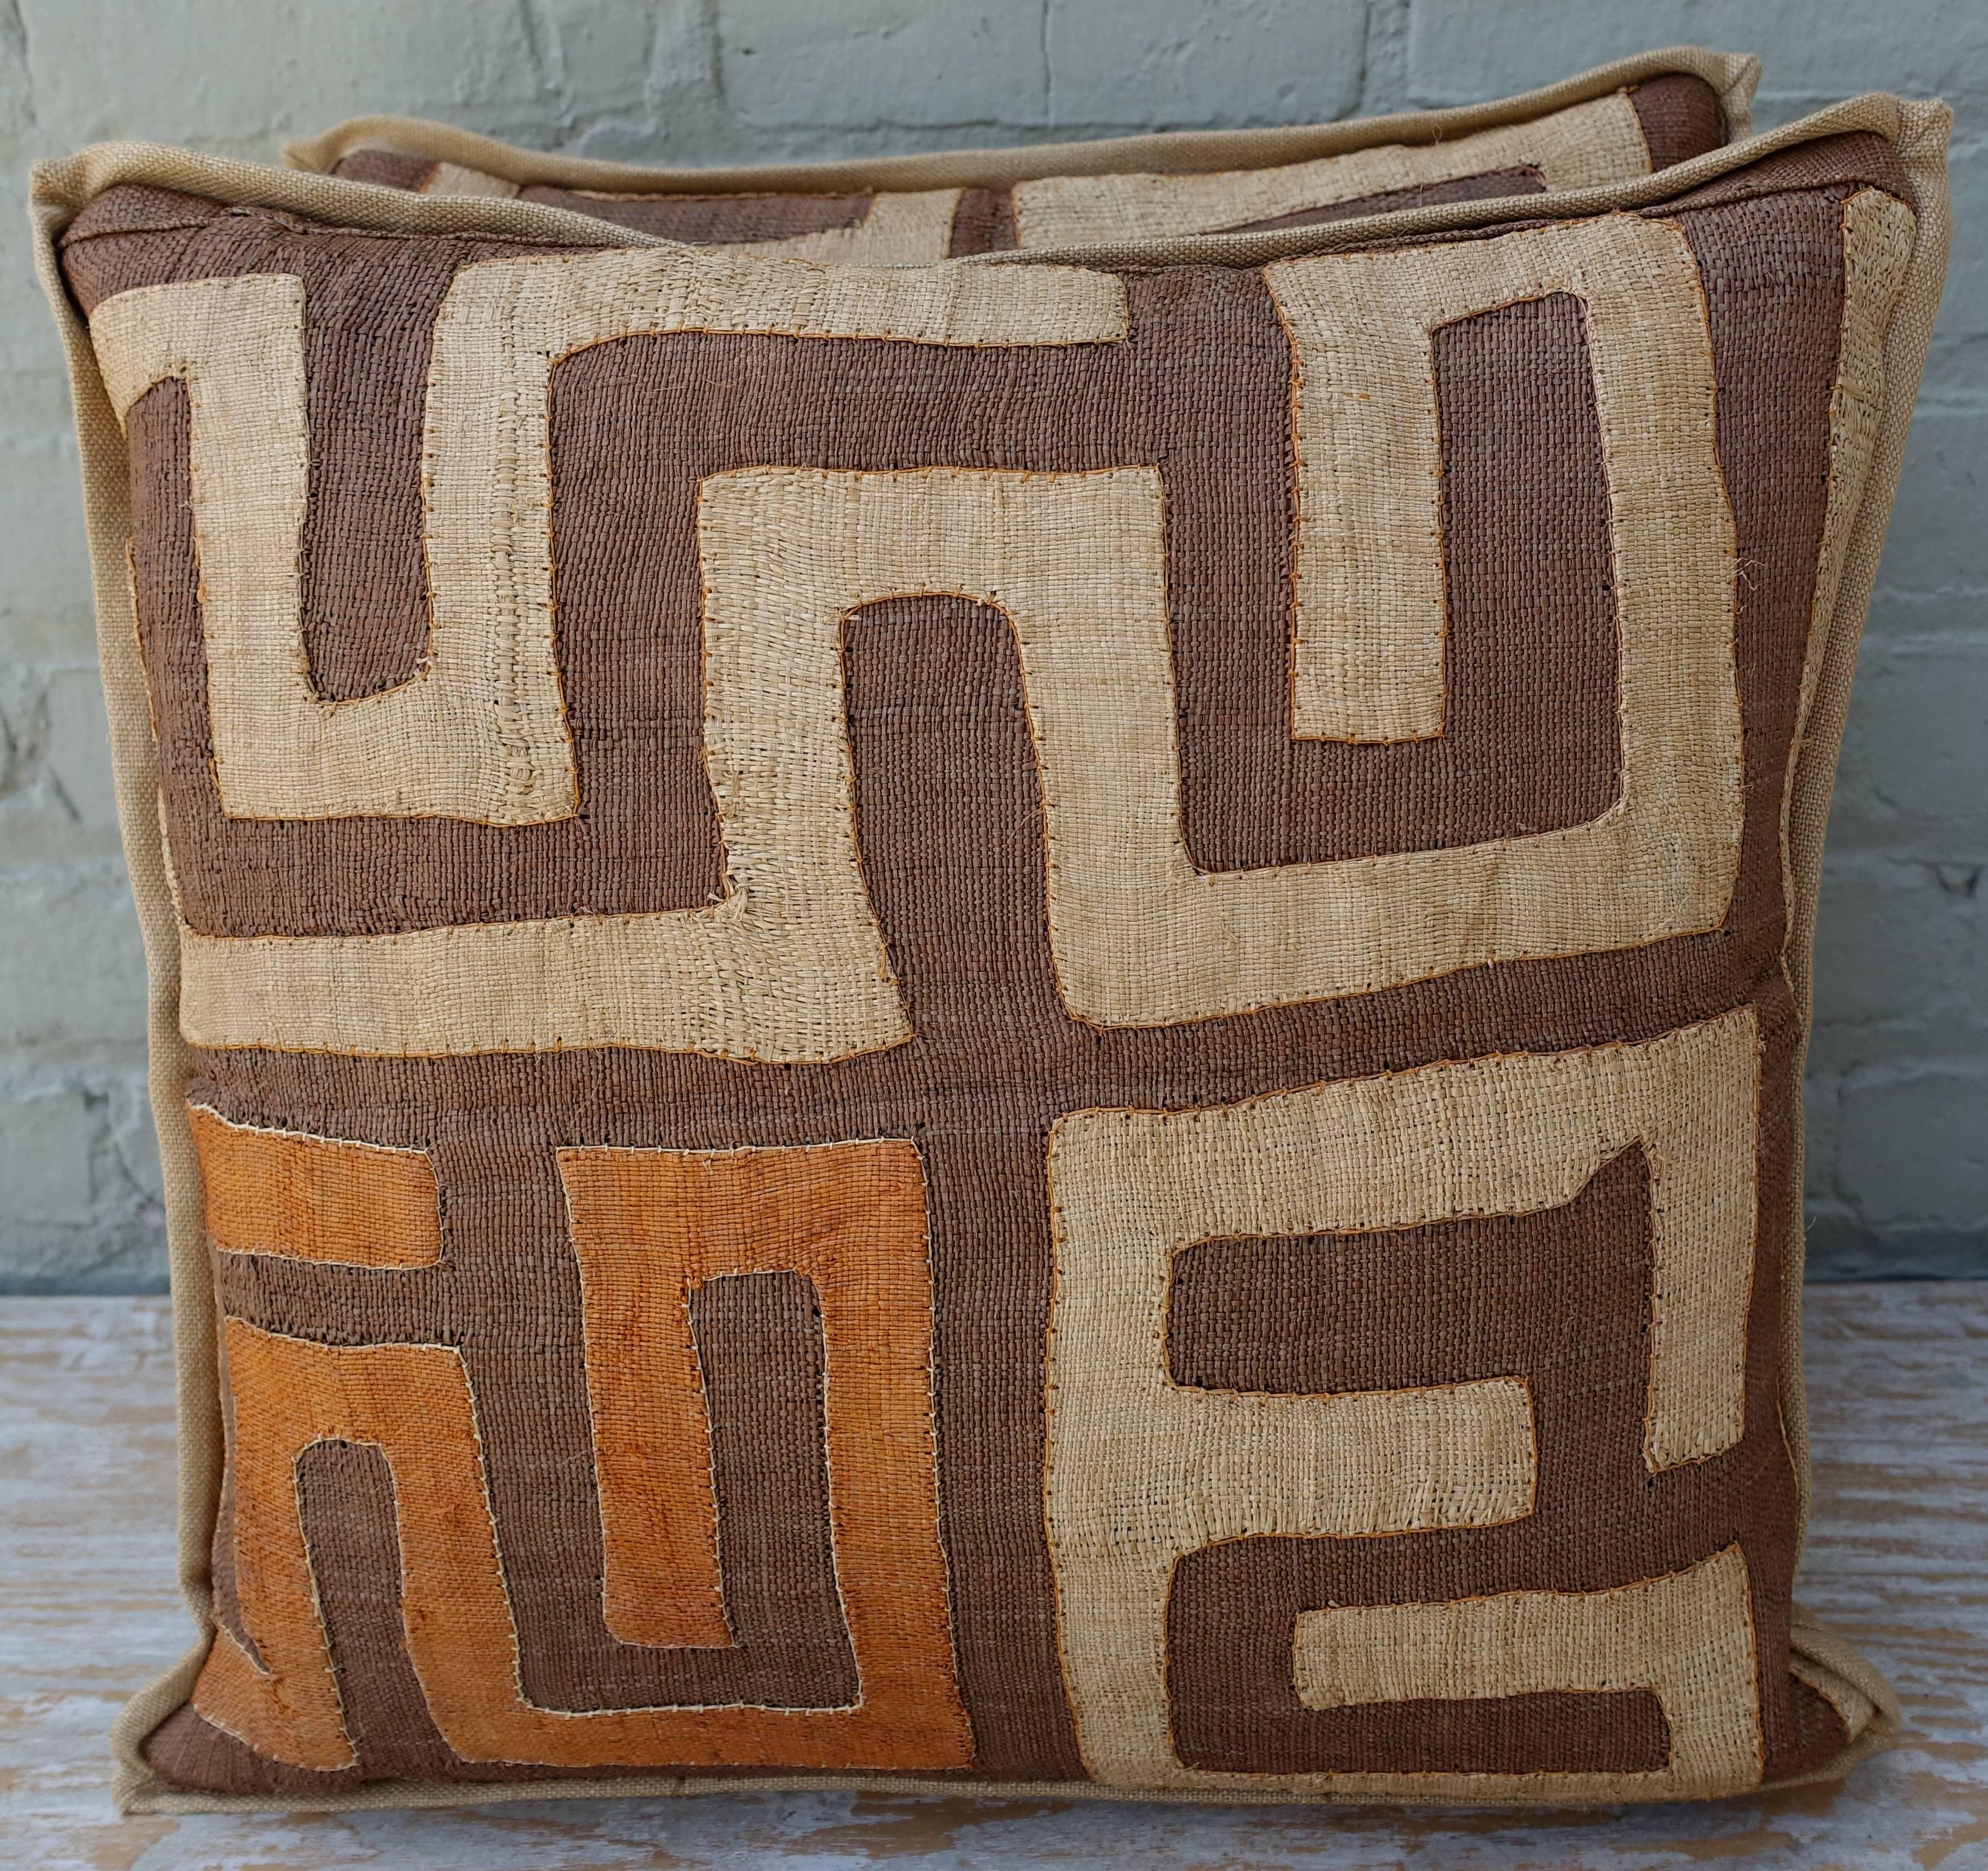 Pair of square shaped brown, wheat and brick orange colored Kuba cloth pillows made with natural raffia African Kuba cloth fronts and natural colored linen backs and self 1/2